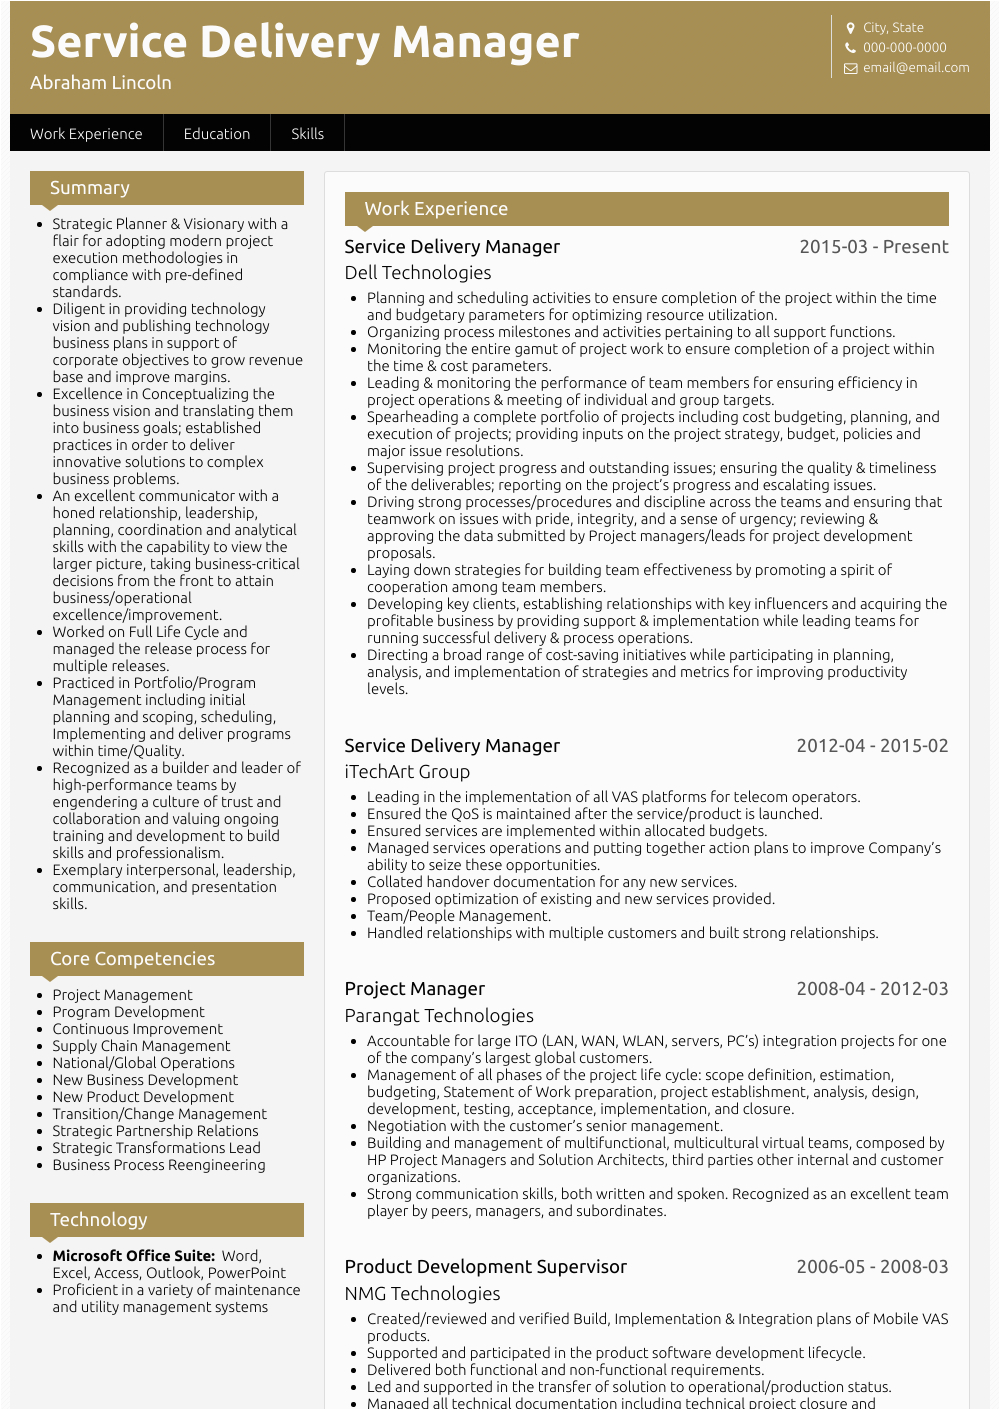 service delivery manager